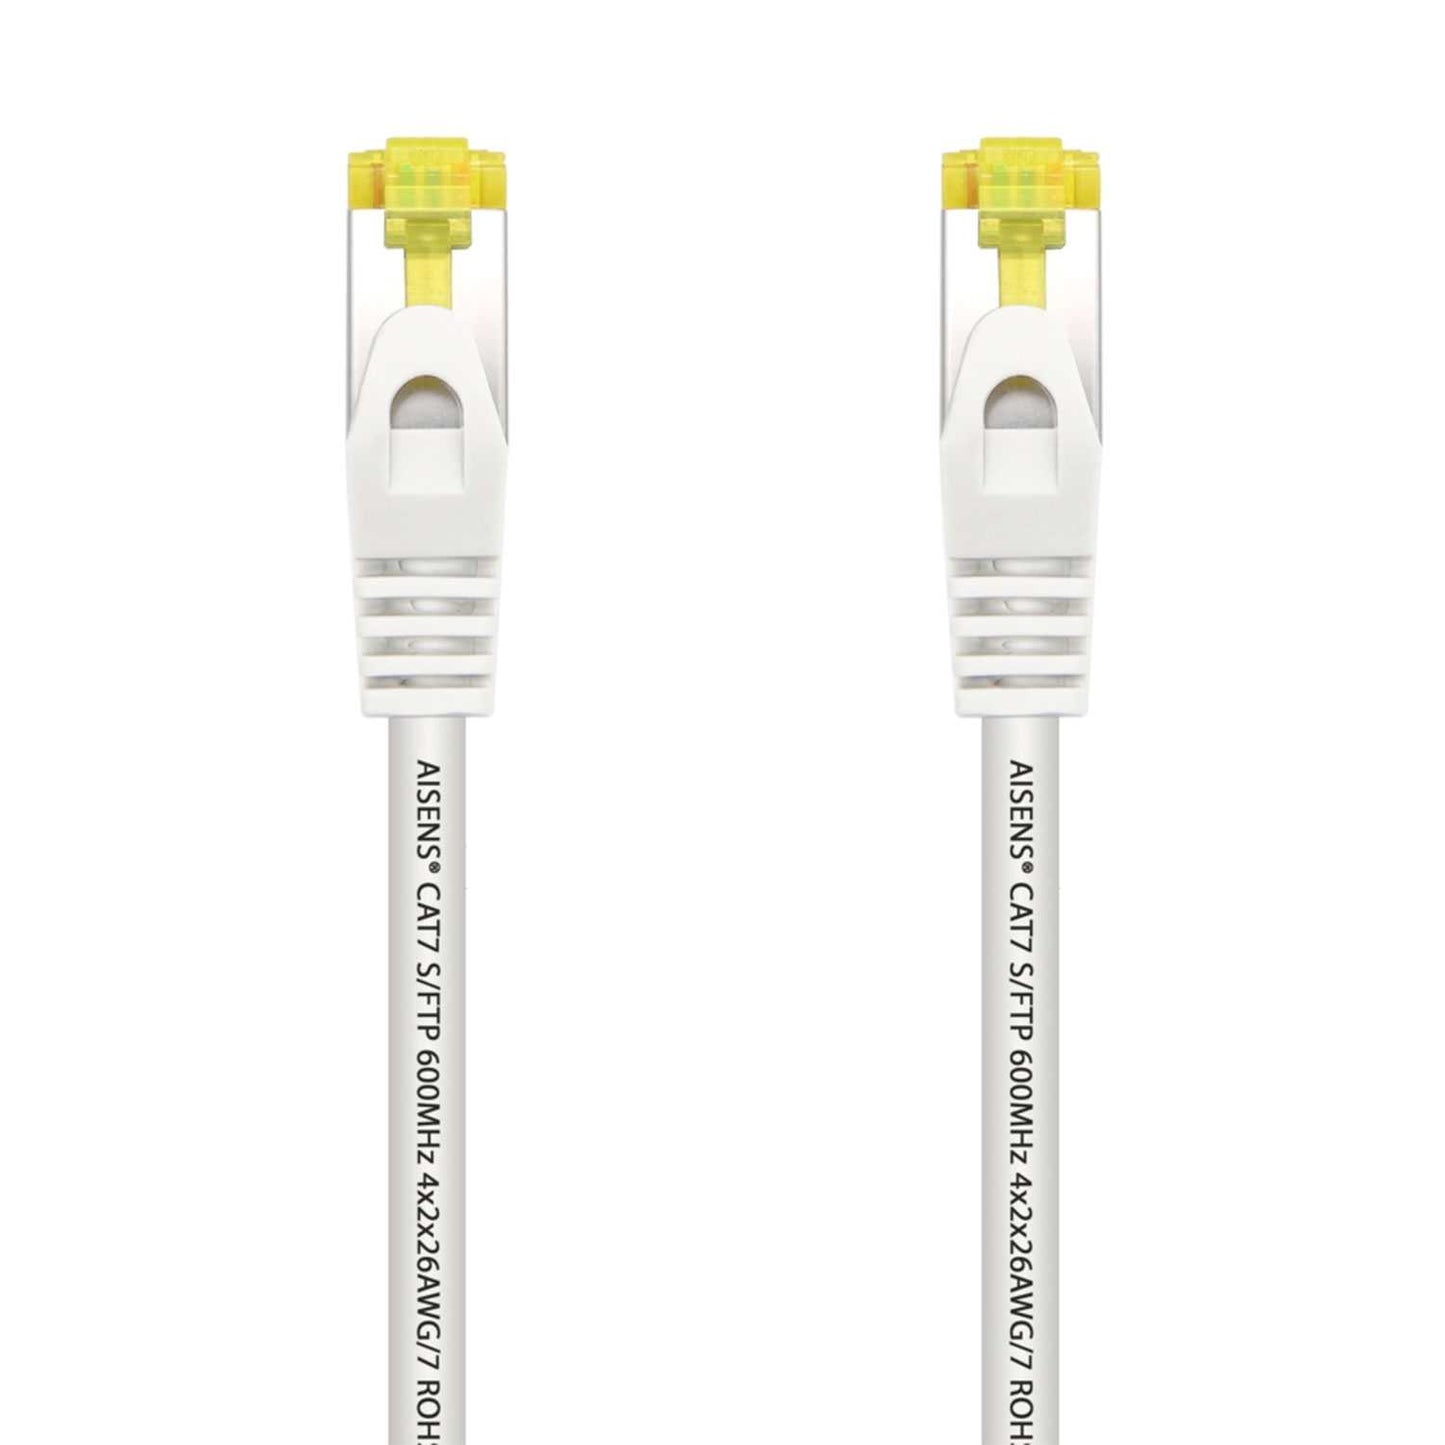 AISENS Cable de red Cat.7, 600 MHz S/FTP PIMF AWG26, Blanco,  2m